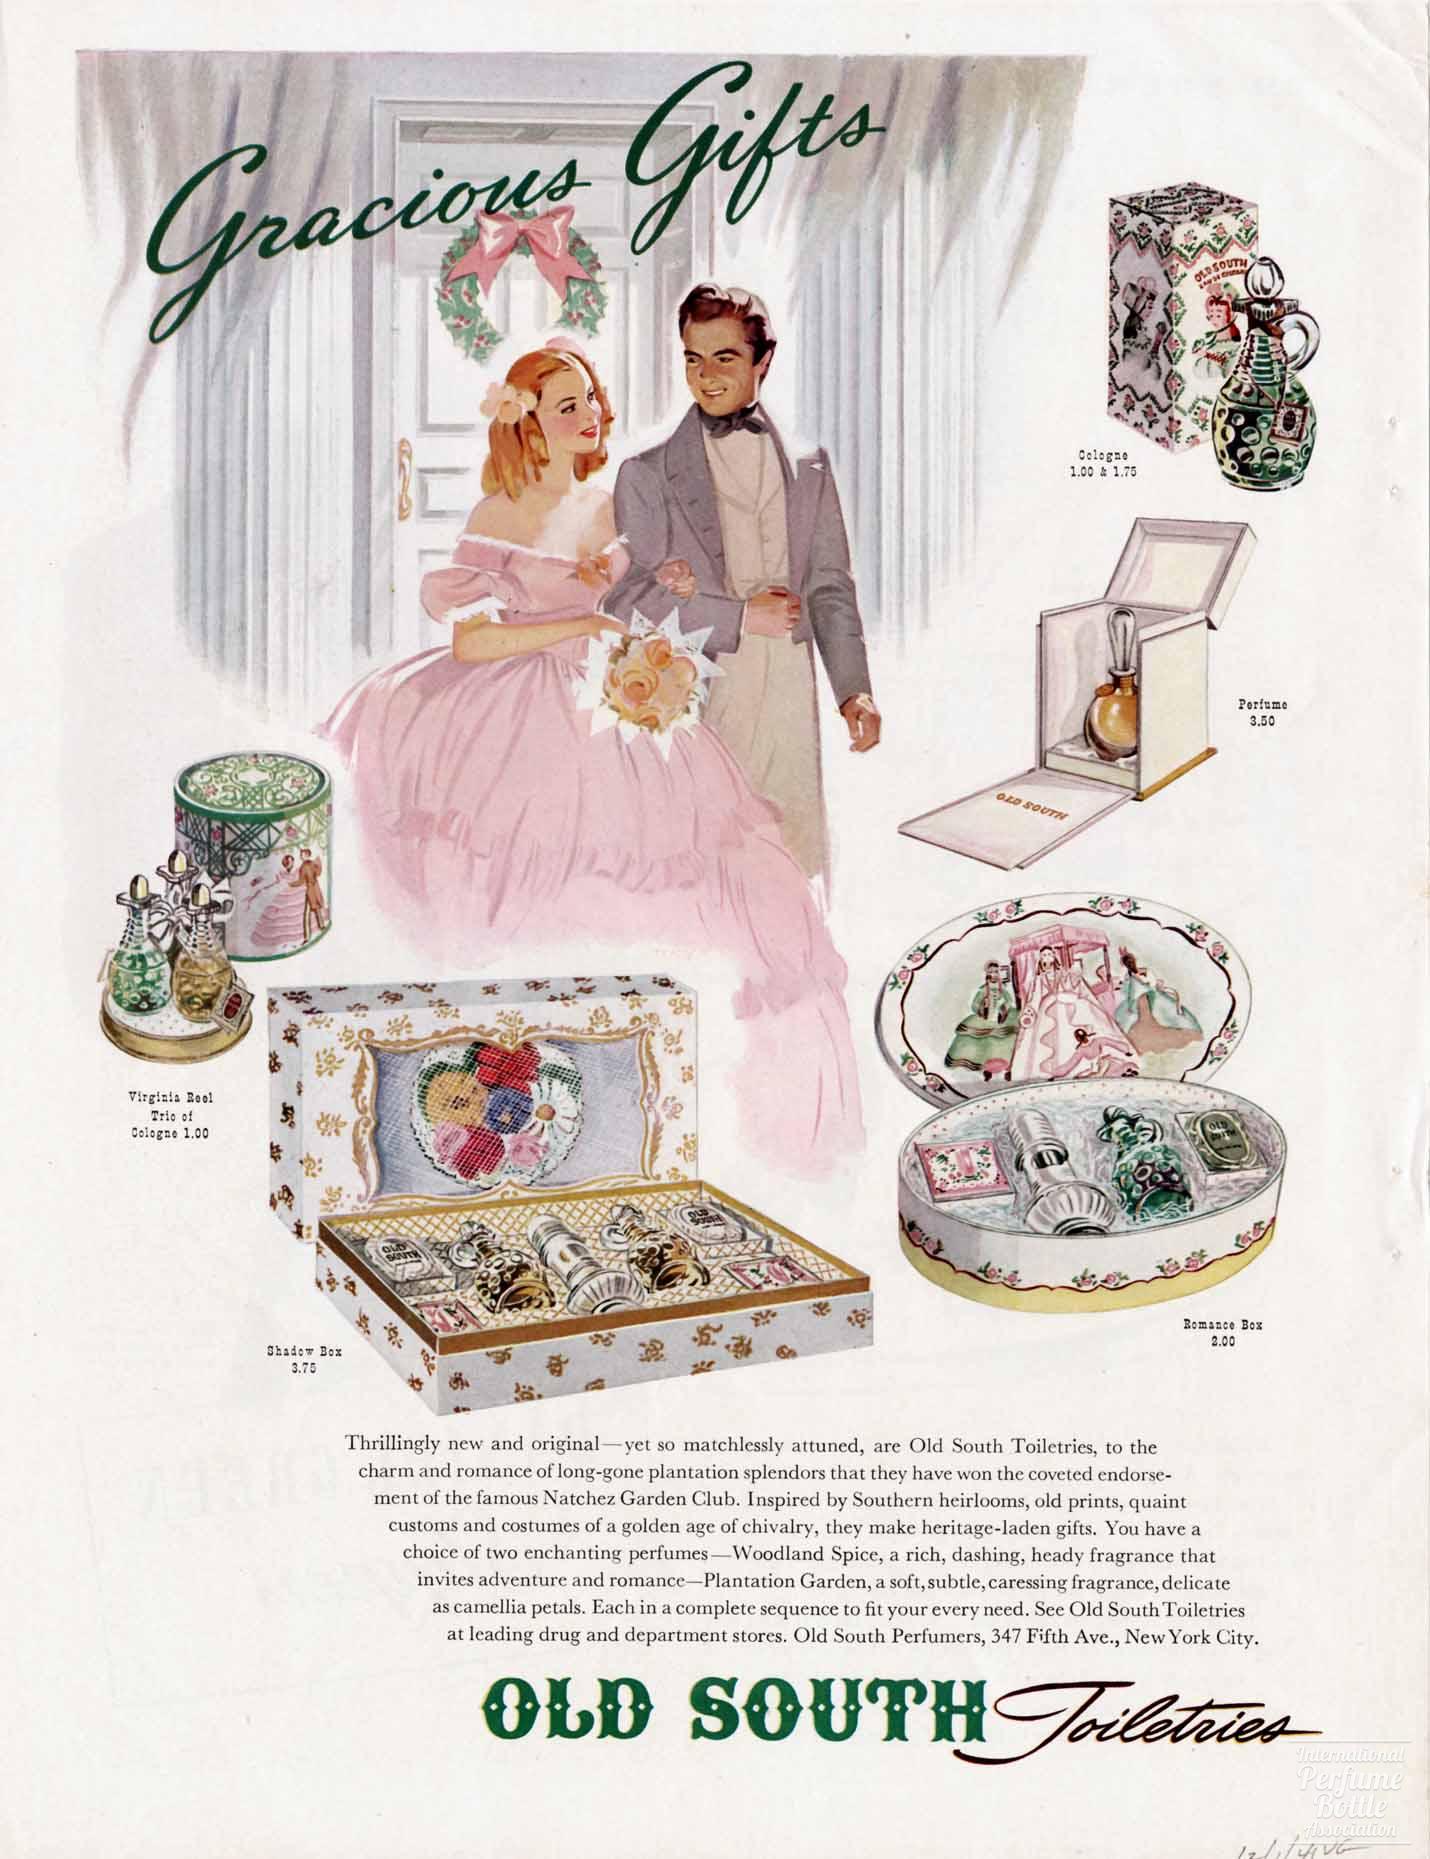 Gracious Gifts by Old South Toiletries Advertisement - 1941